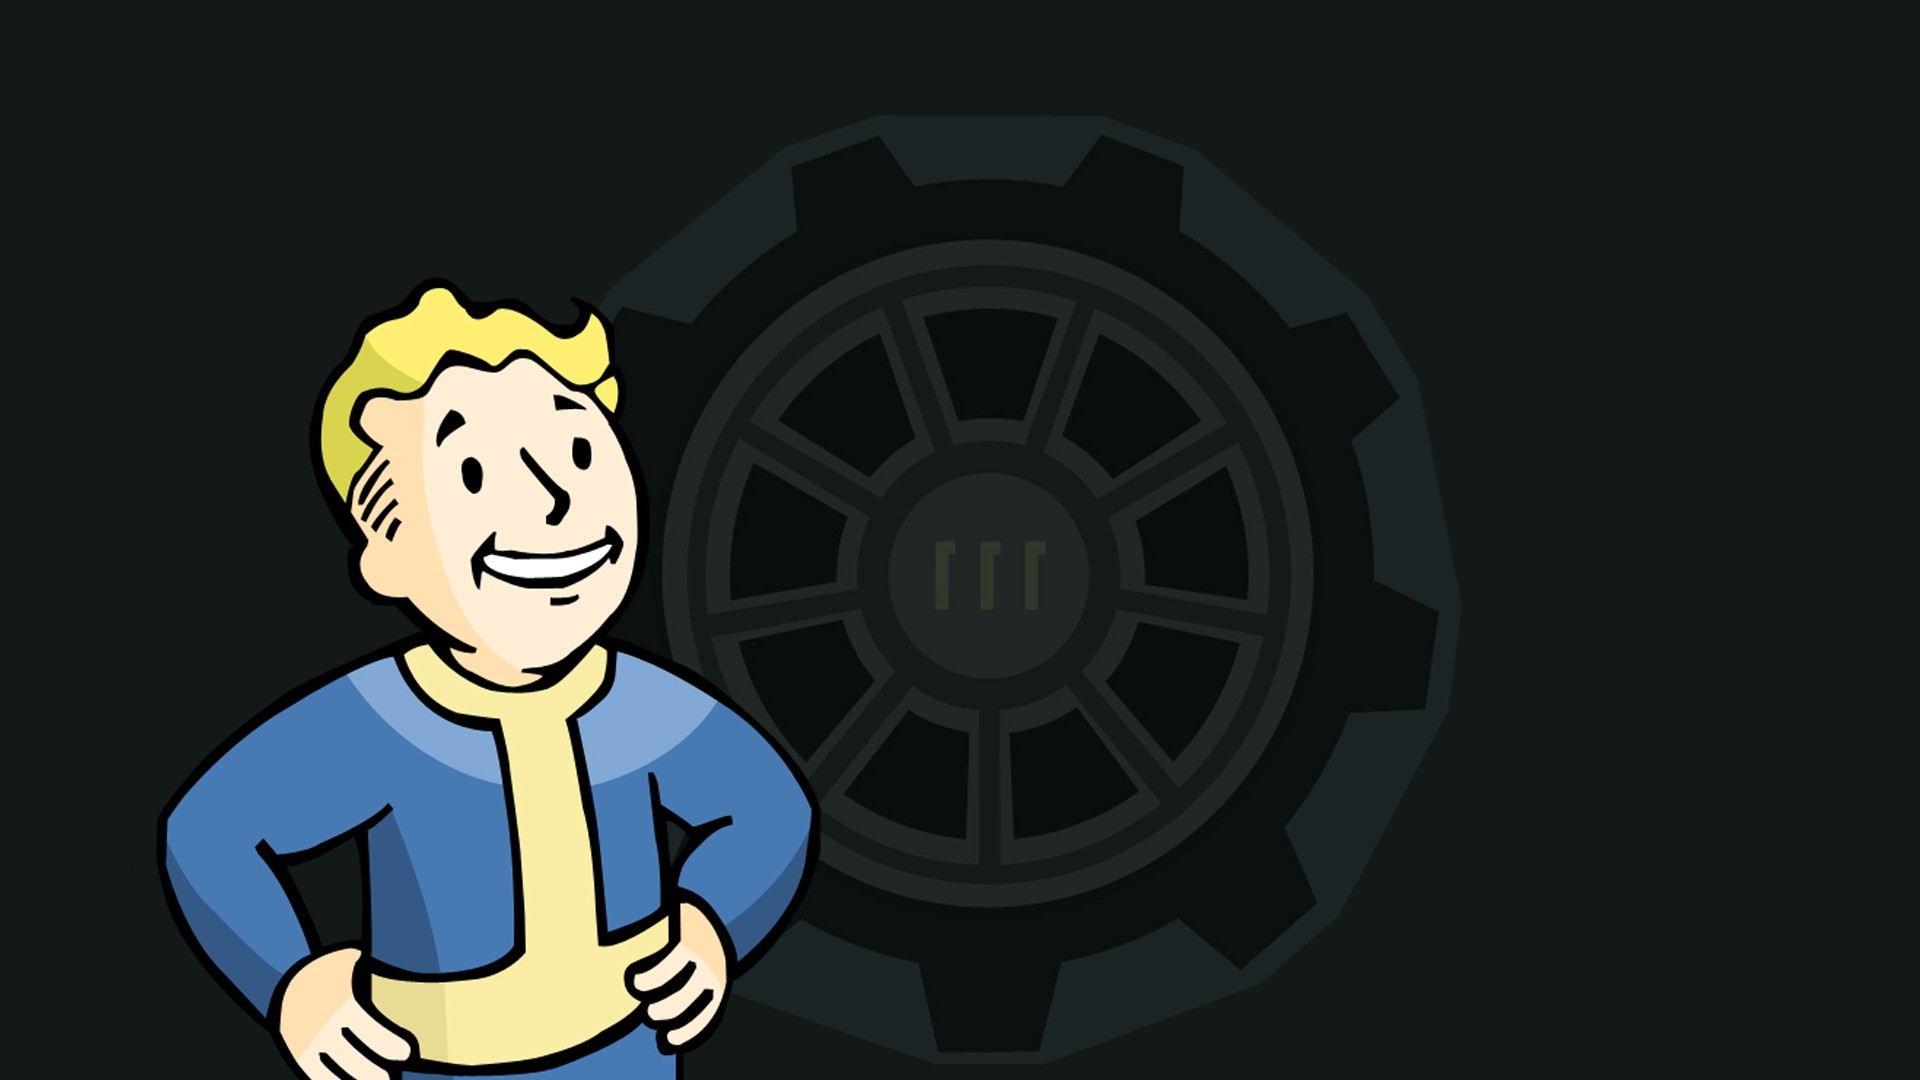 Fallout 4, Video Games, Vault 111, Vault Boy, Fallout, Bethesda Softworks, Apocalyptic Wallpaper